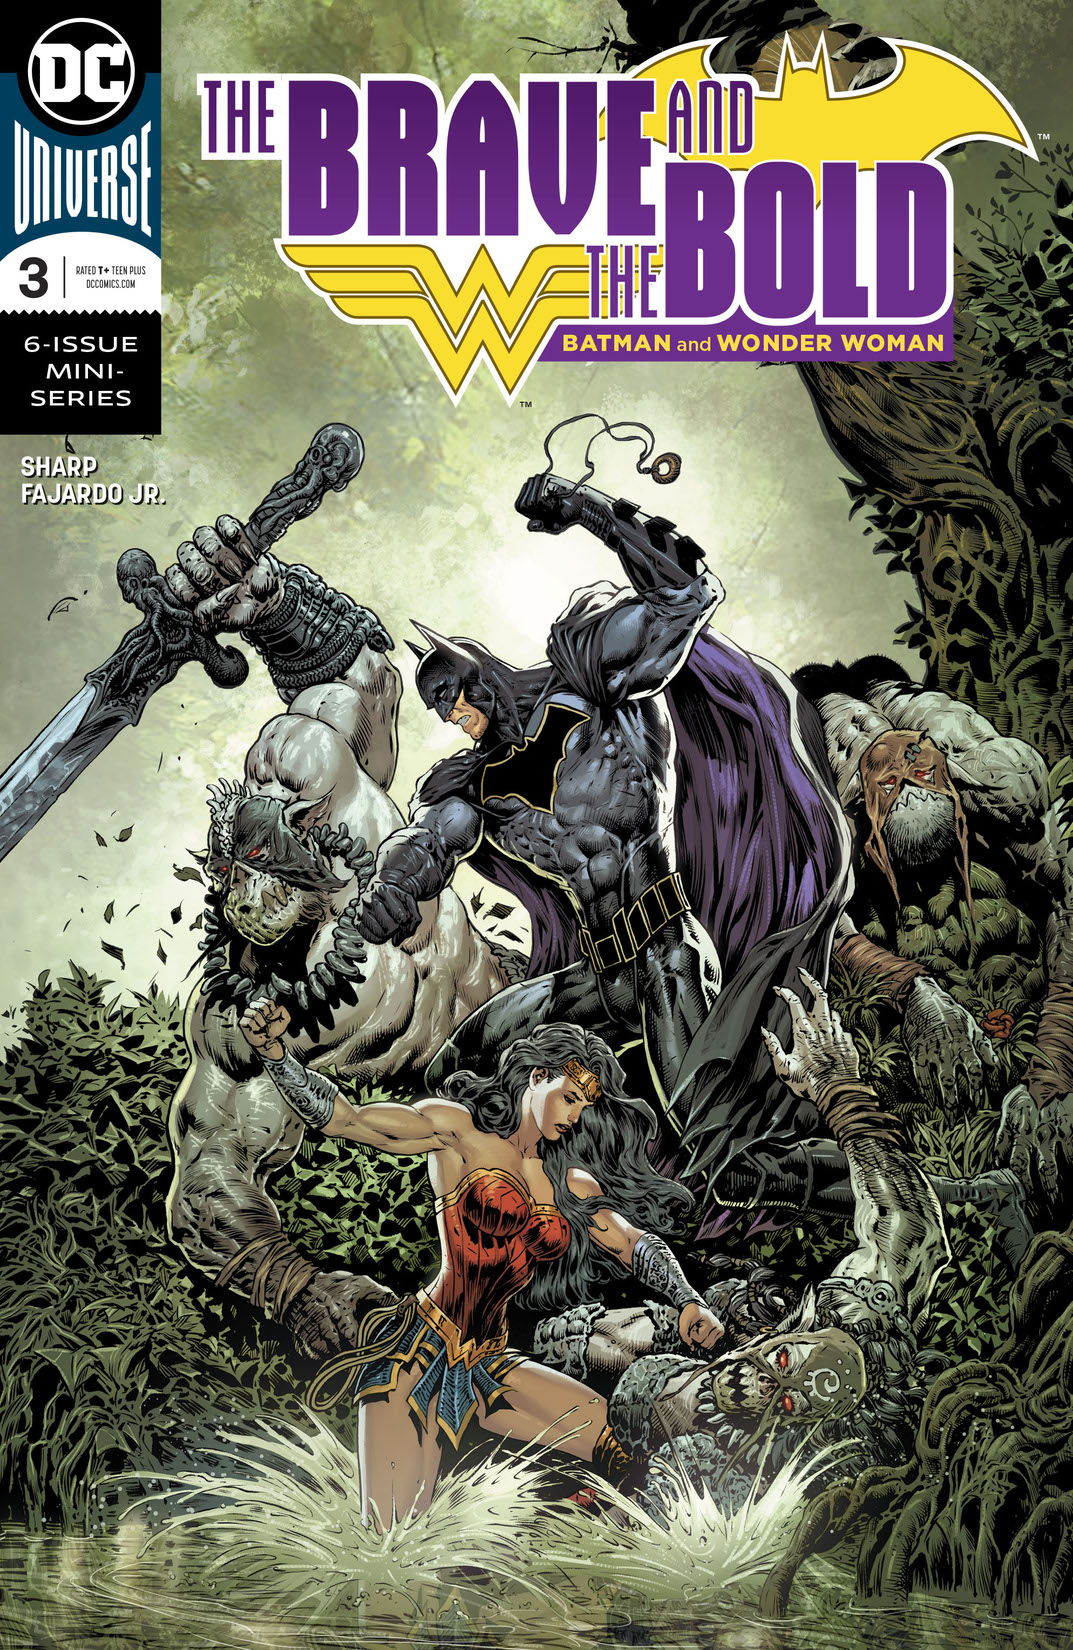 The Brave and the Bold: Batman and Wonder Woman #3 preview images